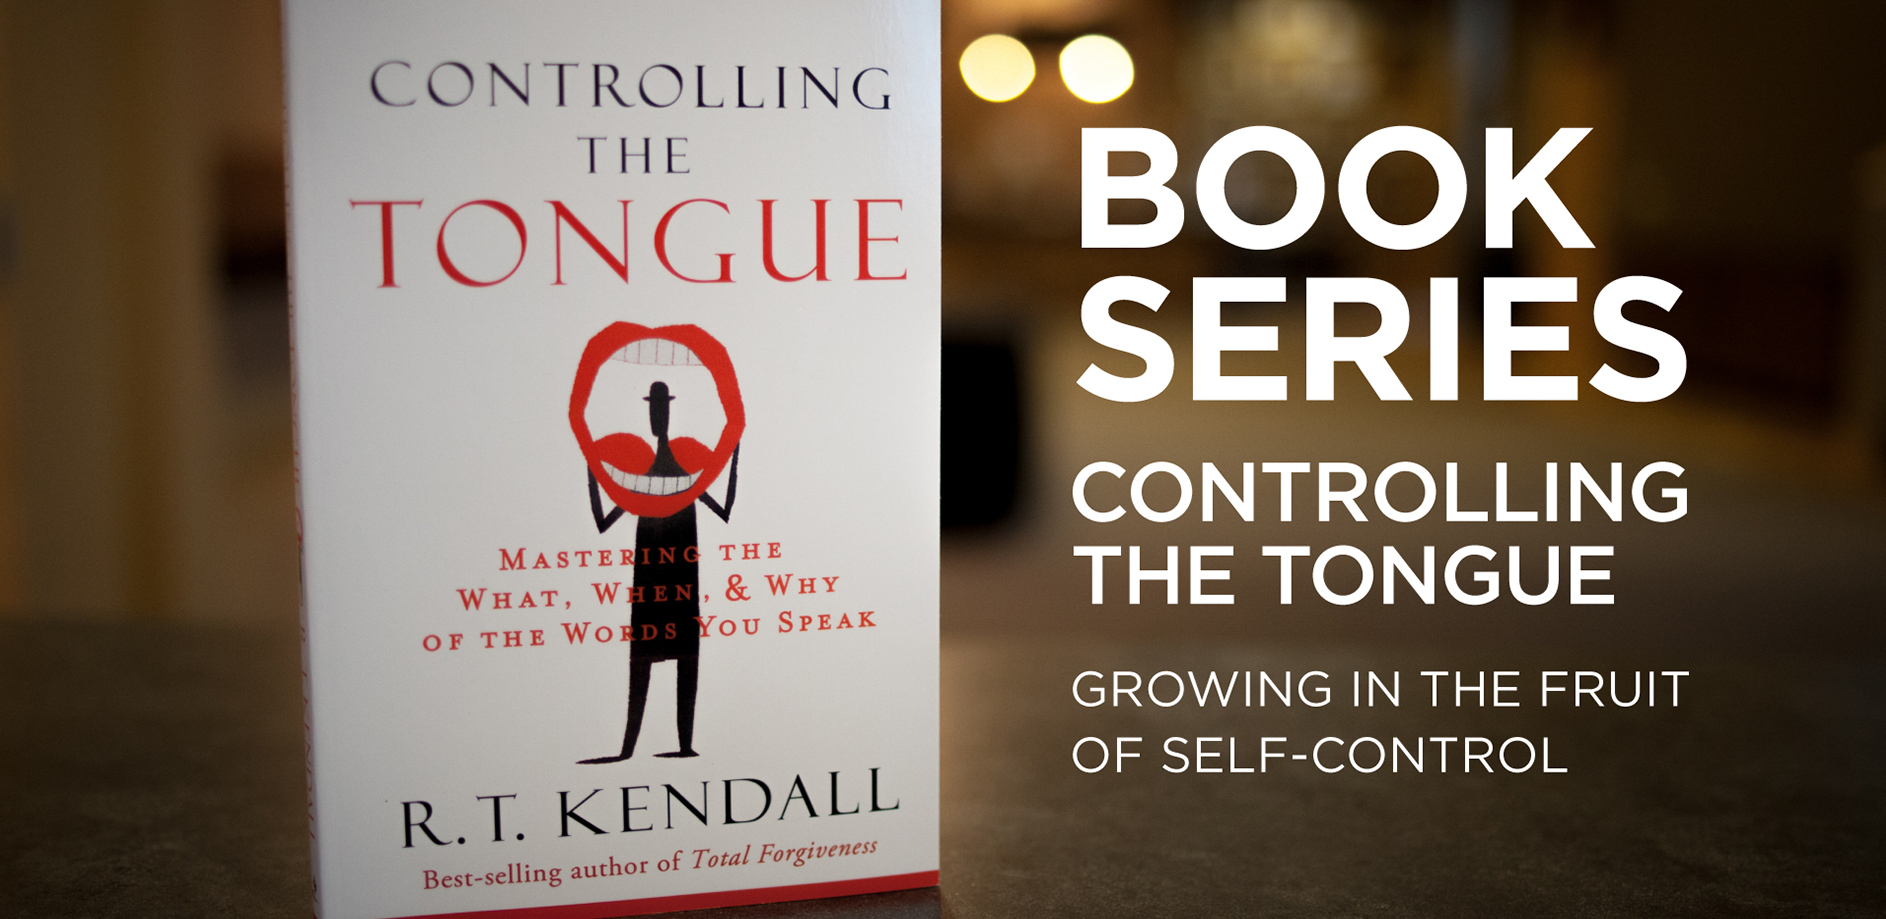 CONTROLLING THE TONGUE - Part 2 | Success in Controlling the Tongue